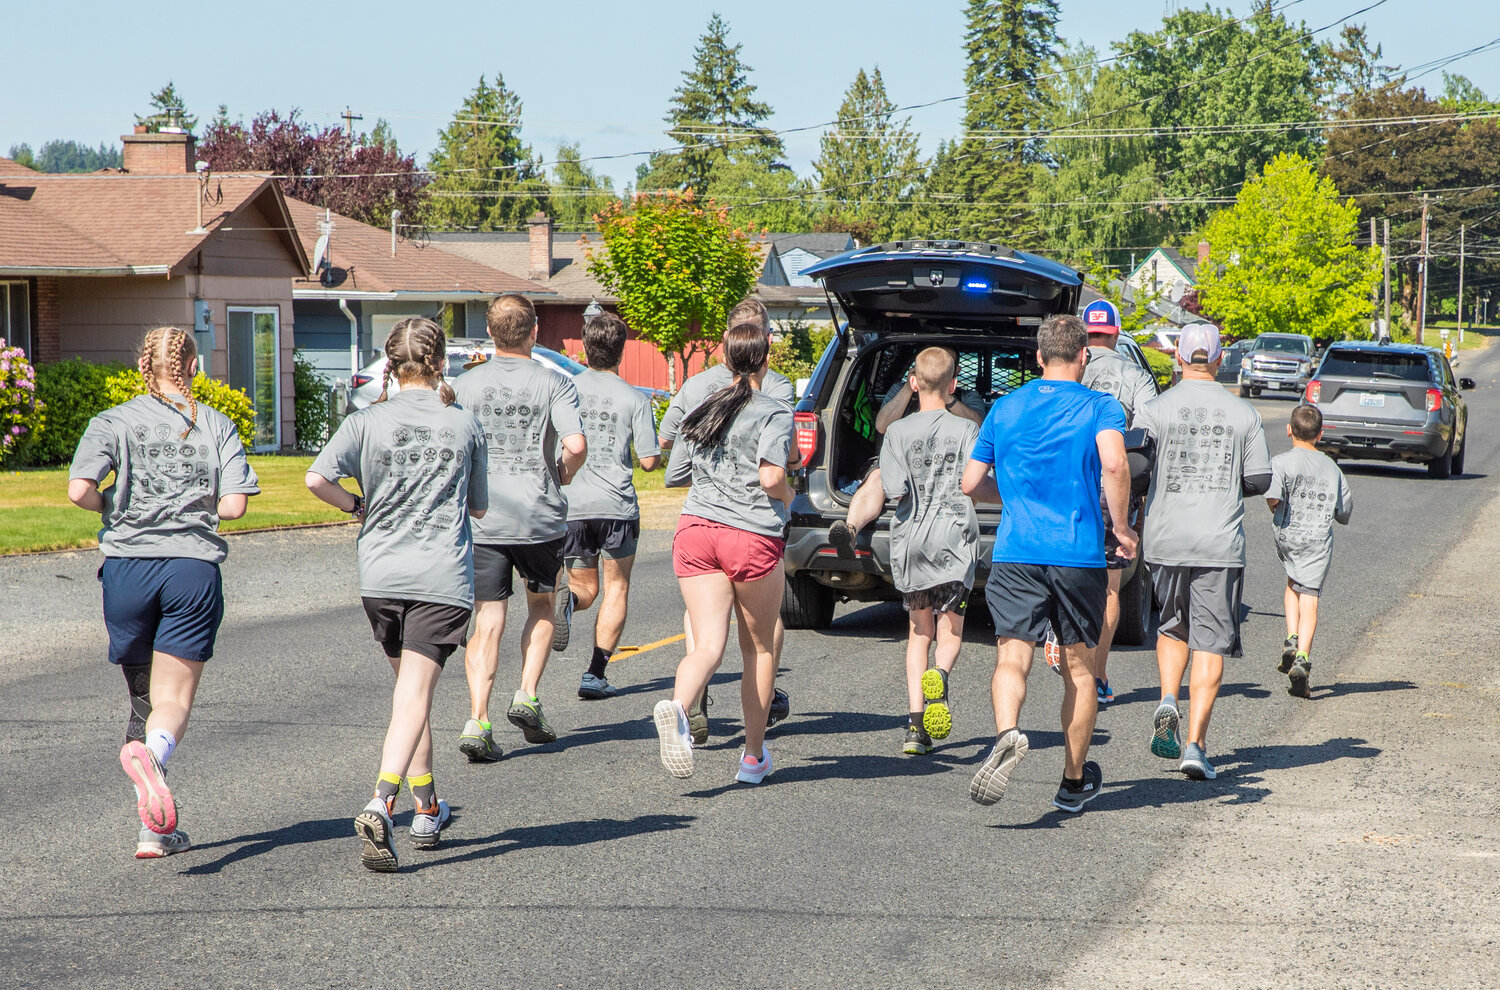 Centralia Police Sergeant Dave Clary, Commissioner Sean Swope, Royal Sons, State Rep. Peter Abbarno and his son Antonio ran the whole 19 miles during the Lewis County Special Olympics Law Enforcement Torch Run in downtown Chehalis on Friday, June 2.